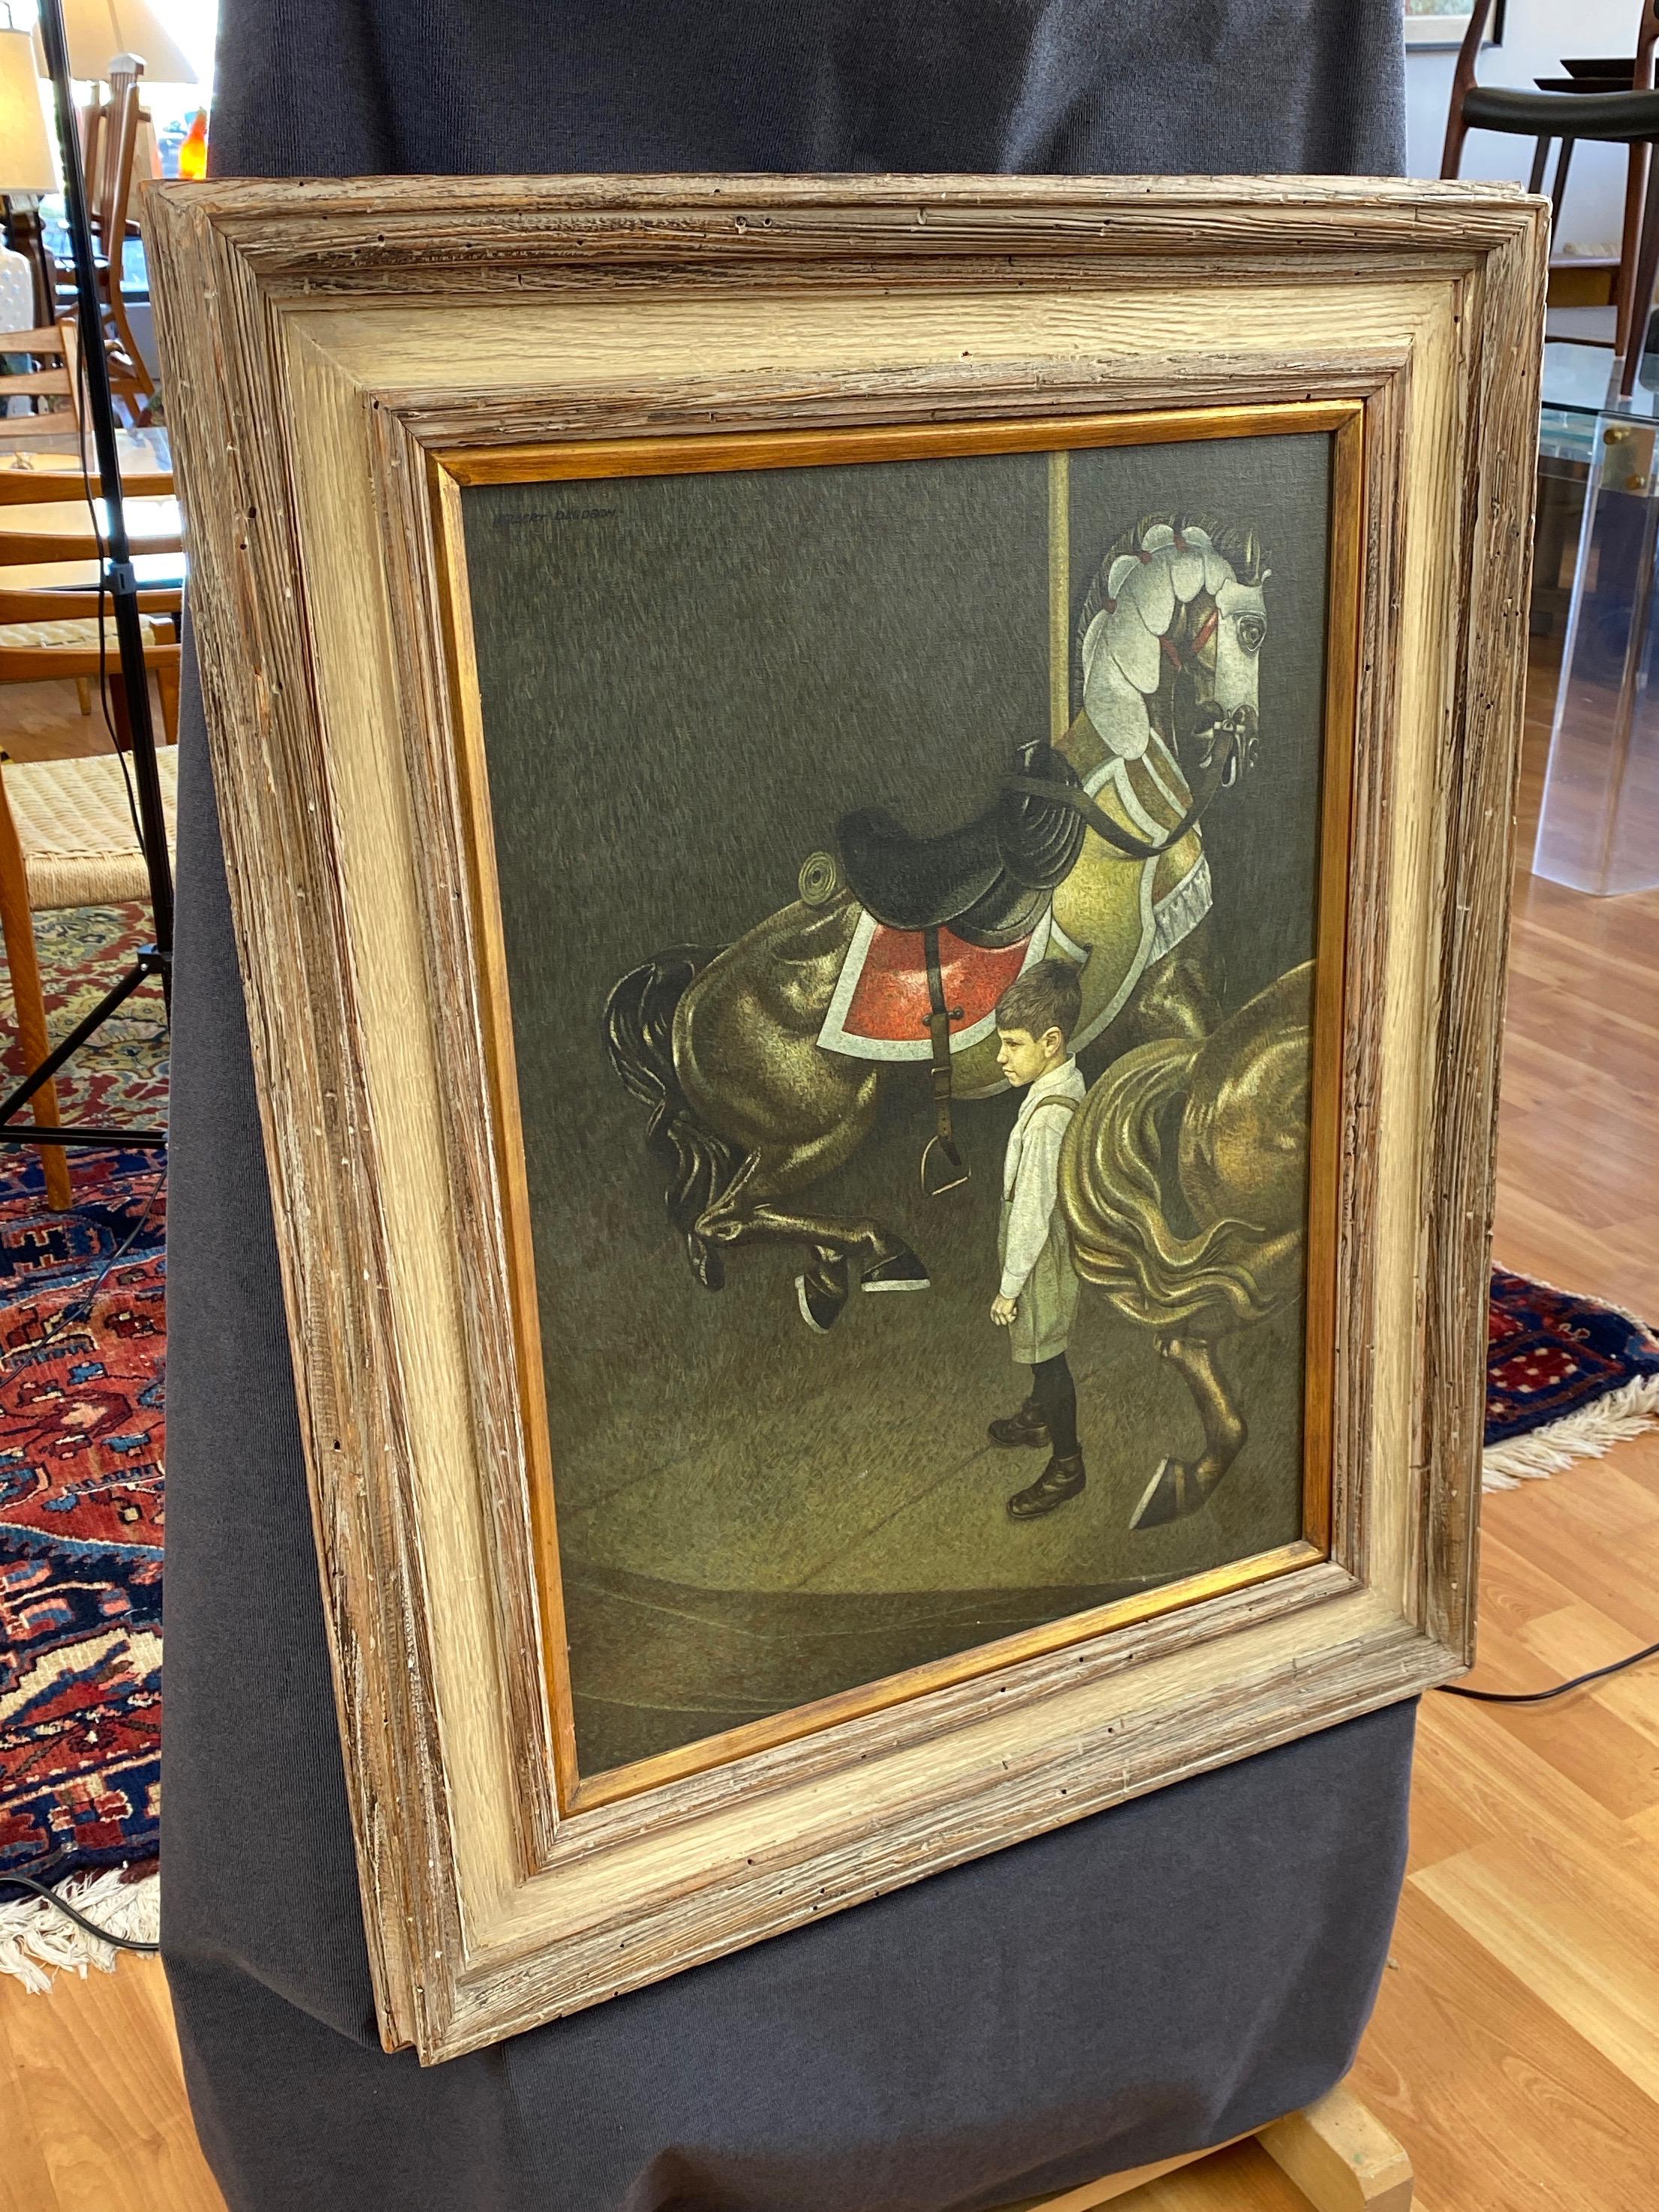 Giltwood Herbert Laurence Davidson “Young Boy on Carousel”, Oil Painting, 1960s For Sale